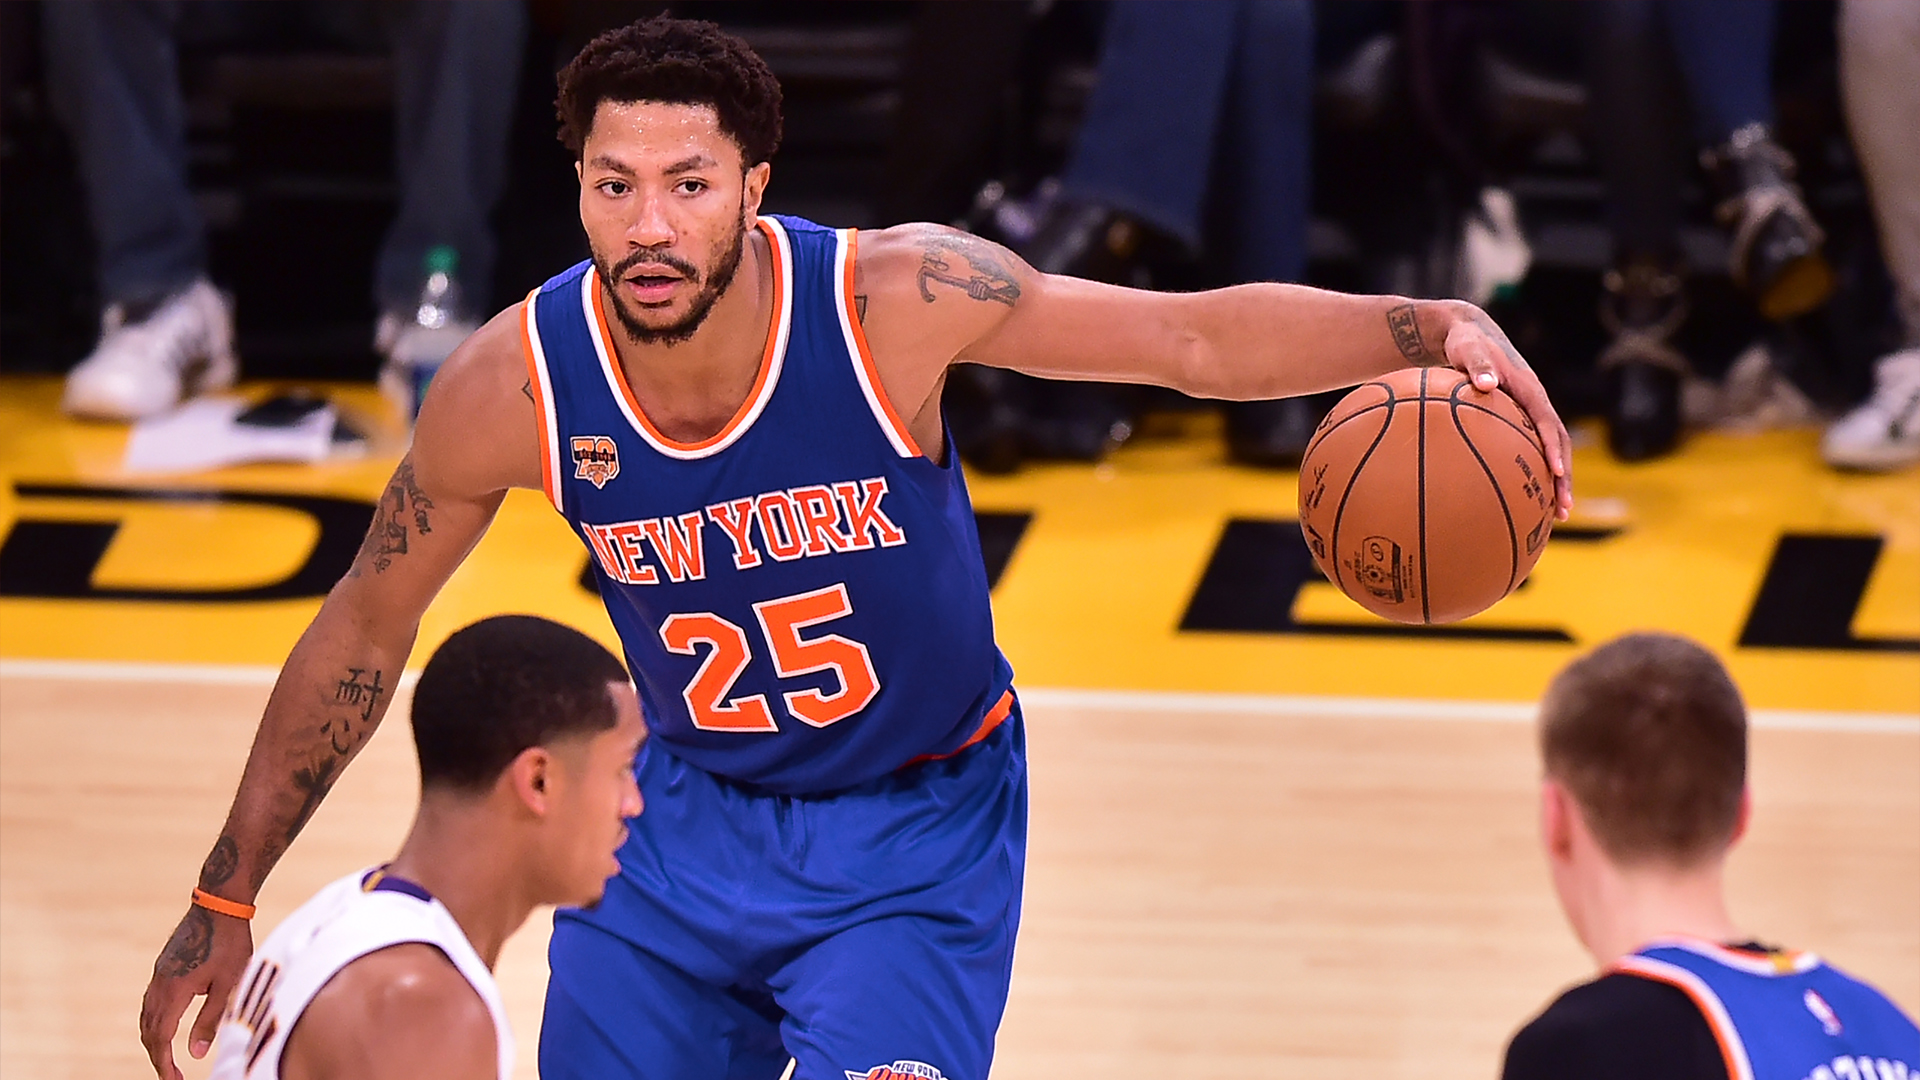 Derrick Rose's Adidas Contract Agrees To Pay His Brother & Best Friend Up To $375K In Salary, Report Says